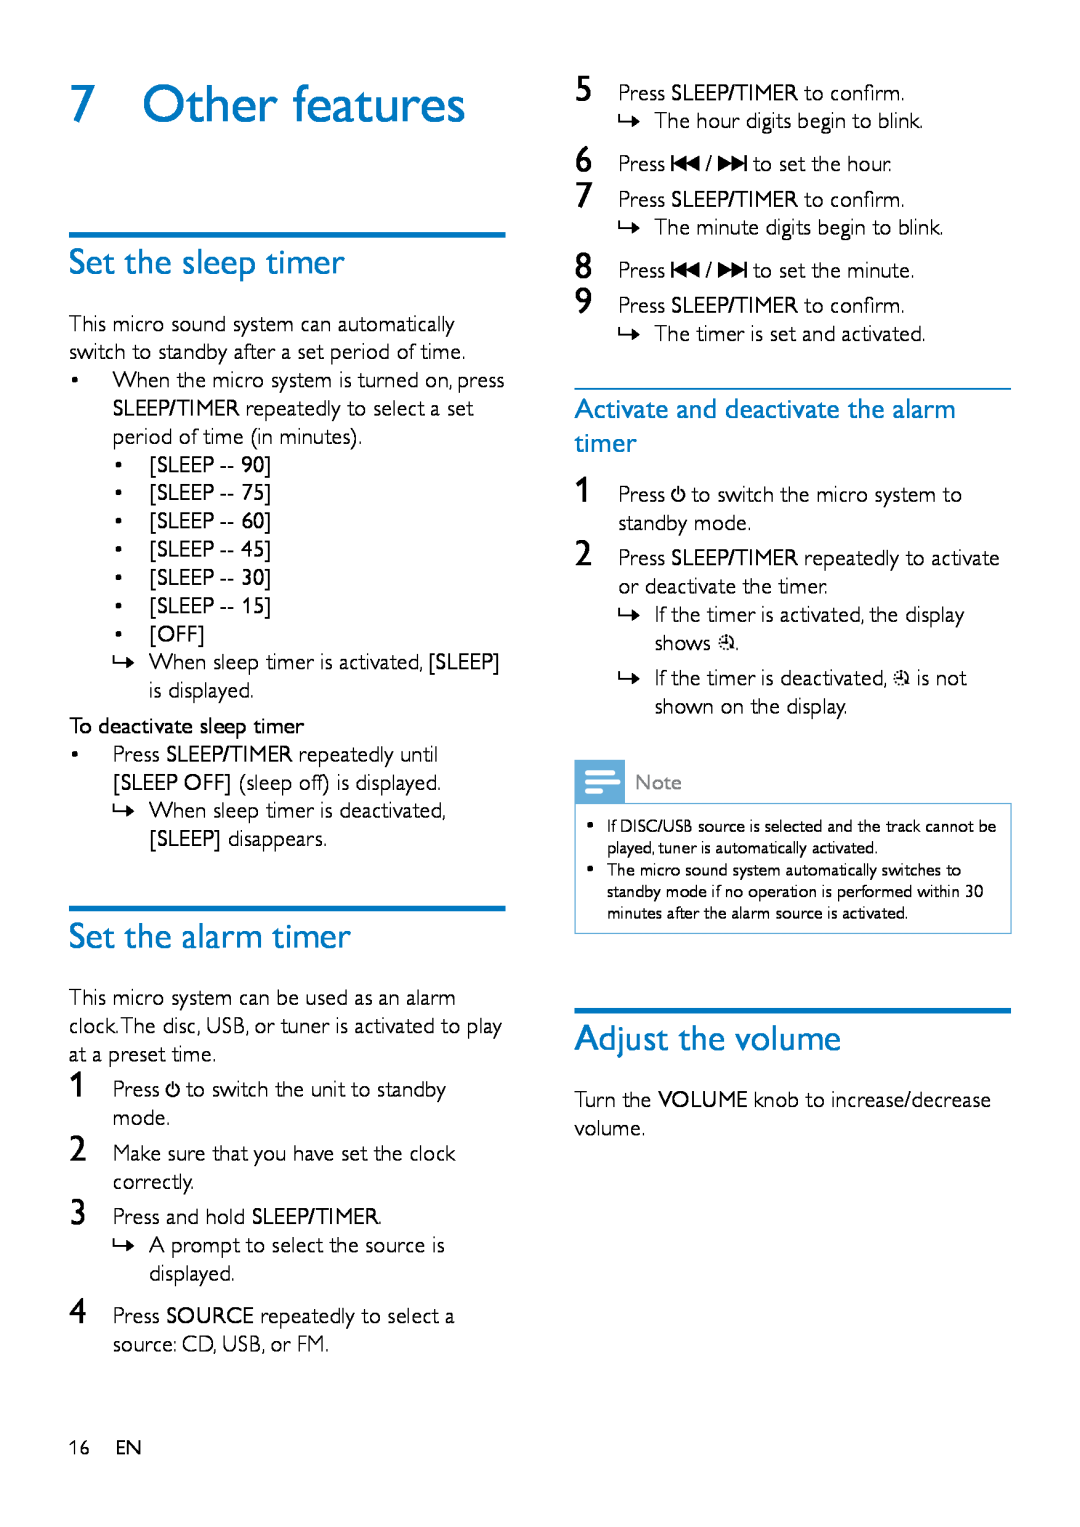 Philips OTT2000 user manual Other features, Set the sleep timer, Set the alarm timer, Adjust the volume 